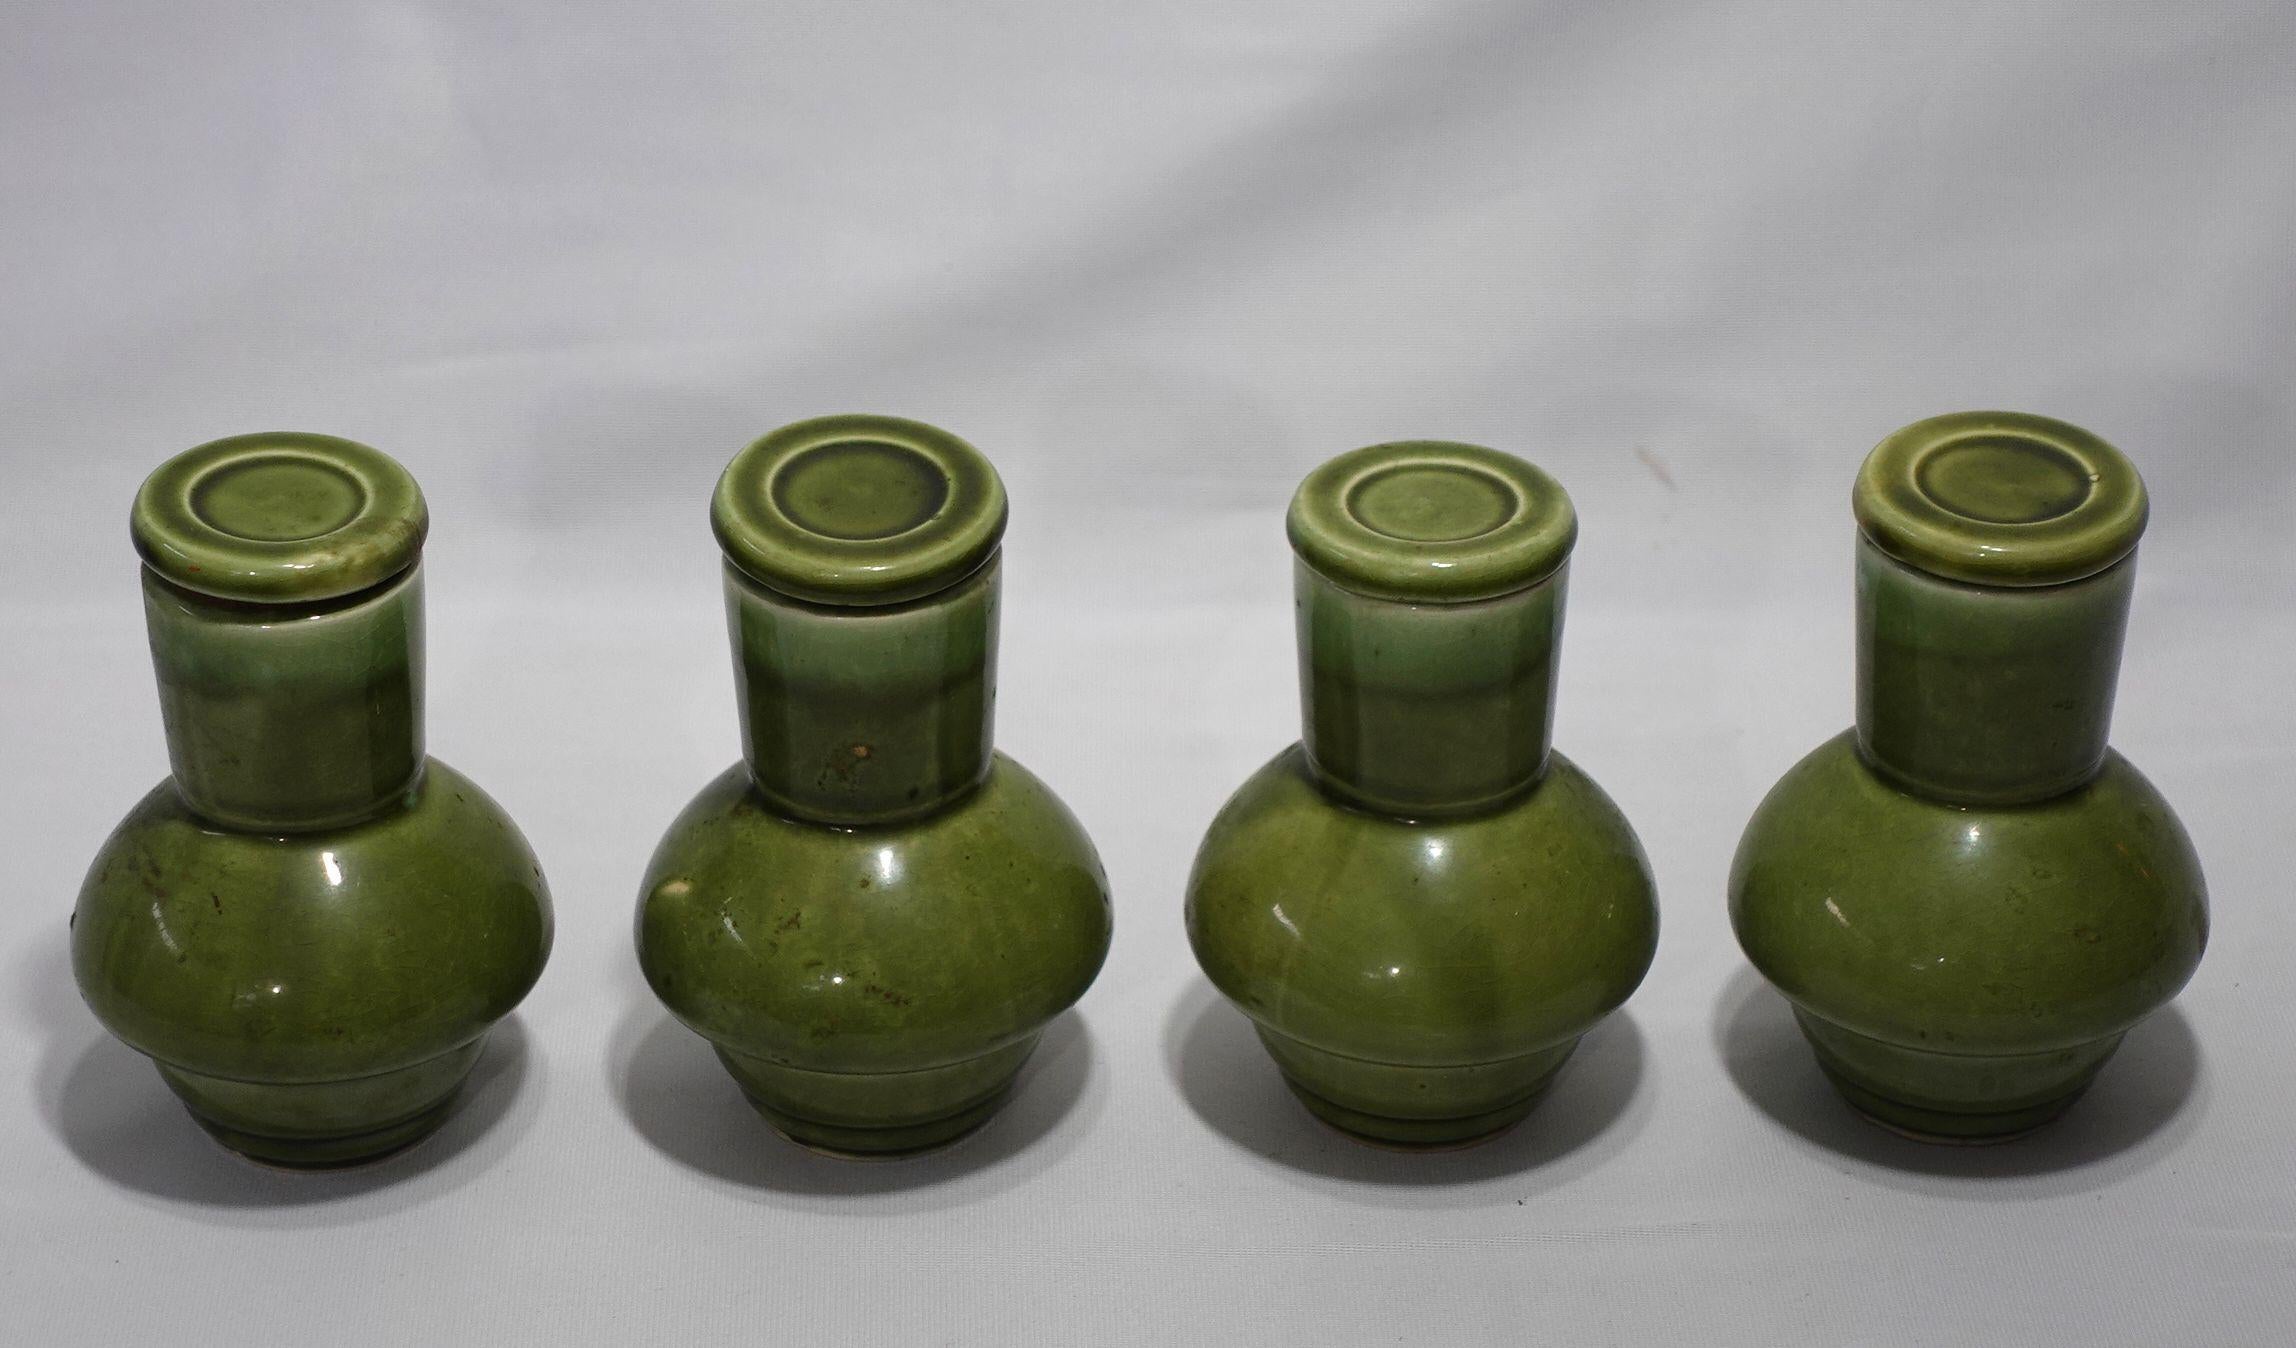 4 Japanese NASCO Porcelain Sake Bottles, Mid-20th century.
Green drip-glazed porcelain with cork-lined stopper. Some of the cork has deteriorated. Label on bottom. Each stands 5.5